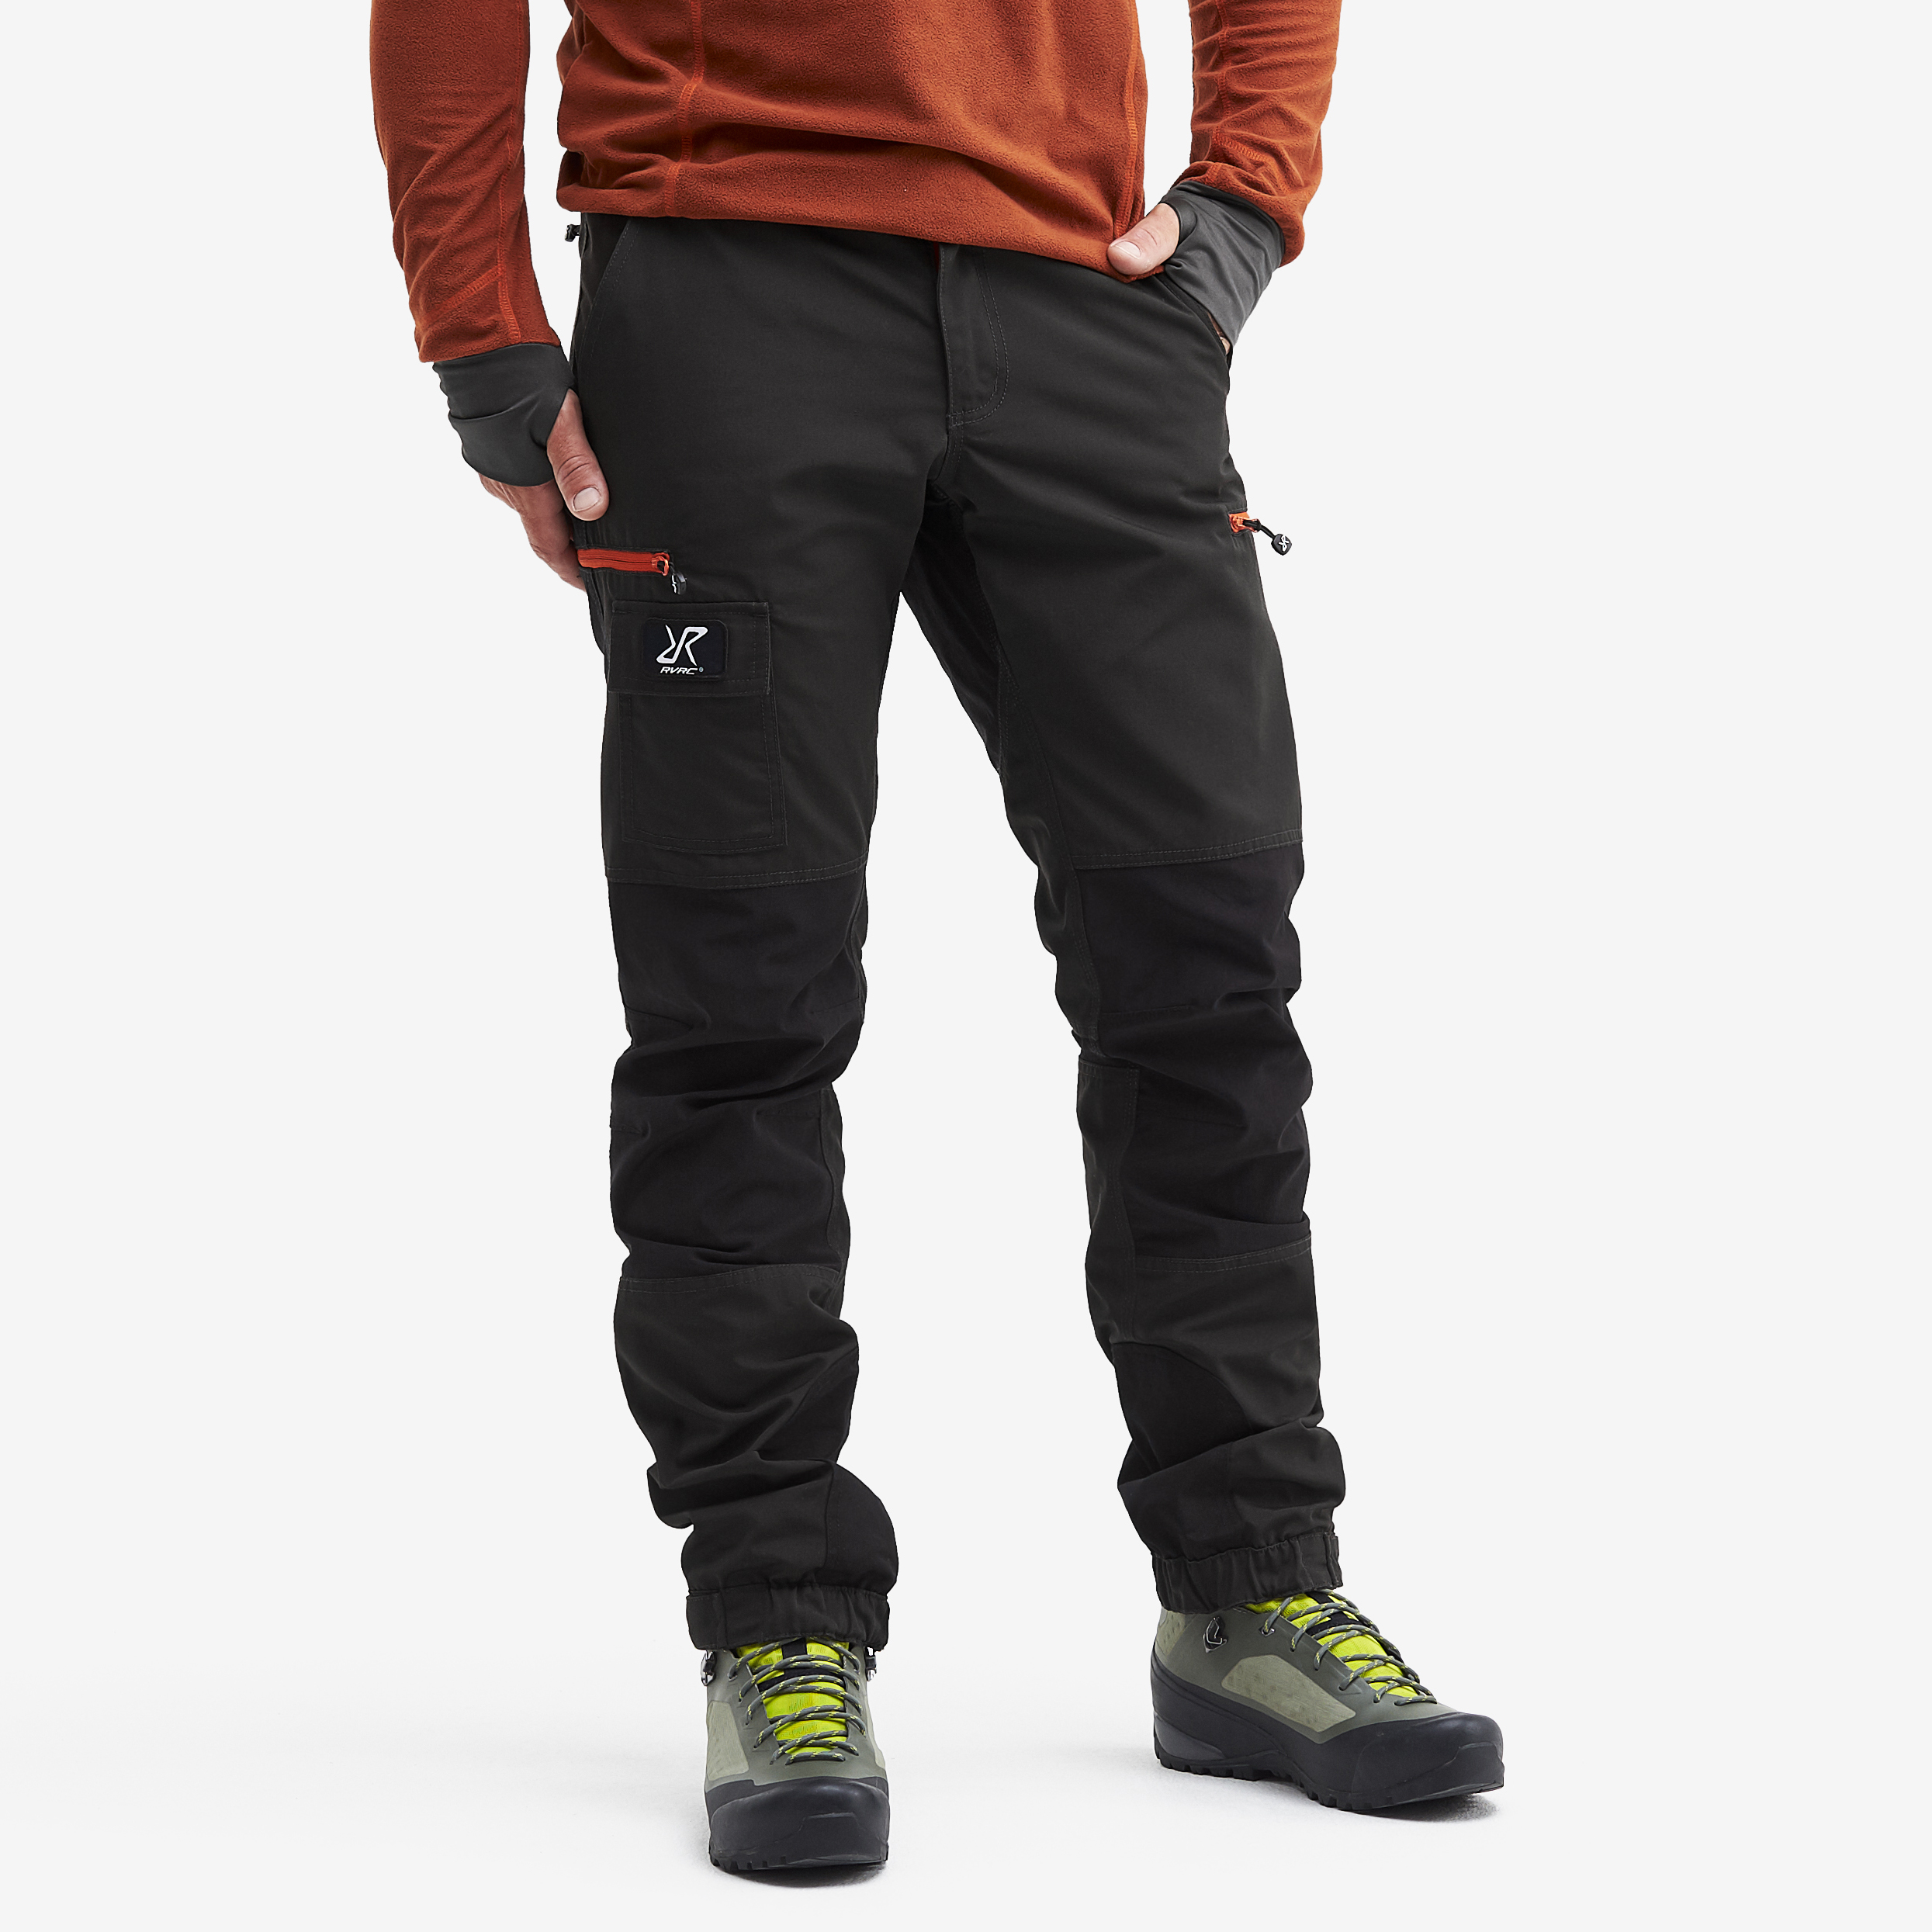 Nordwand Pants Anthracite/Autumn Herr